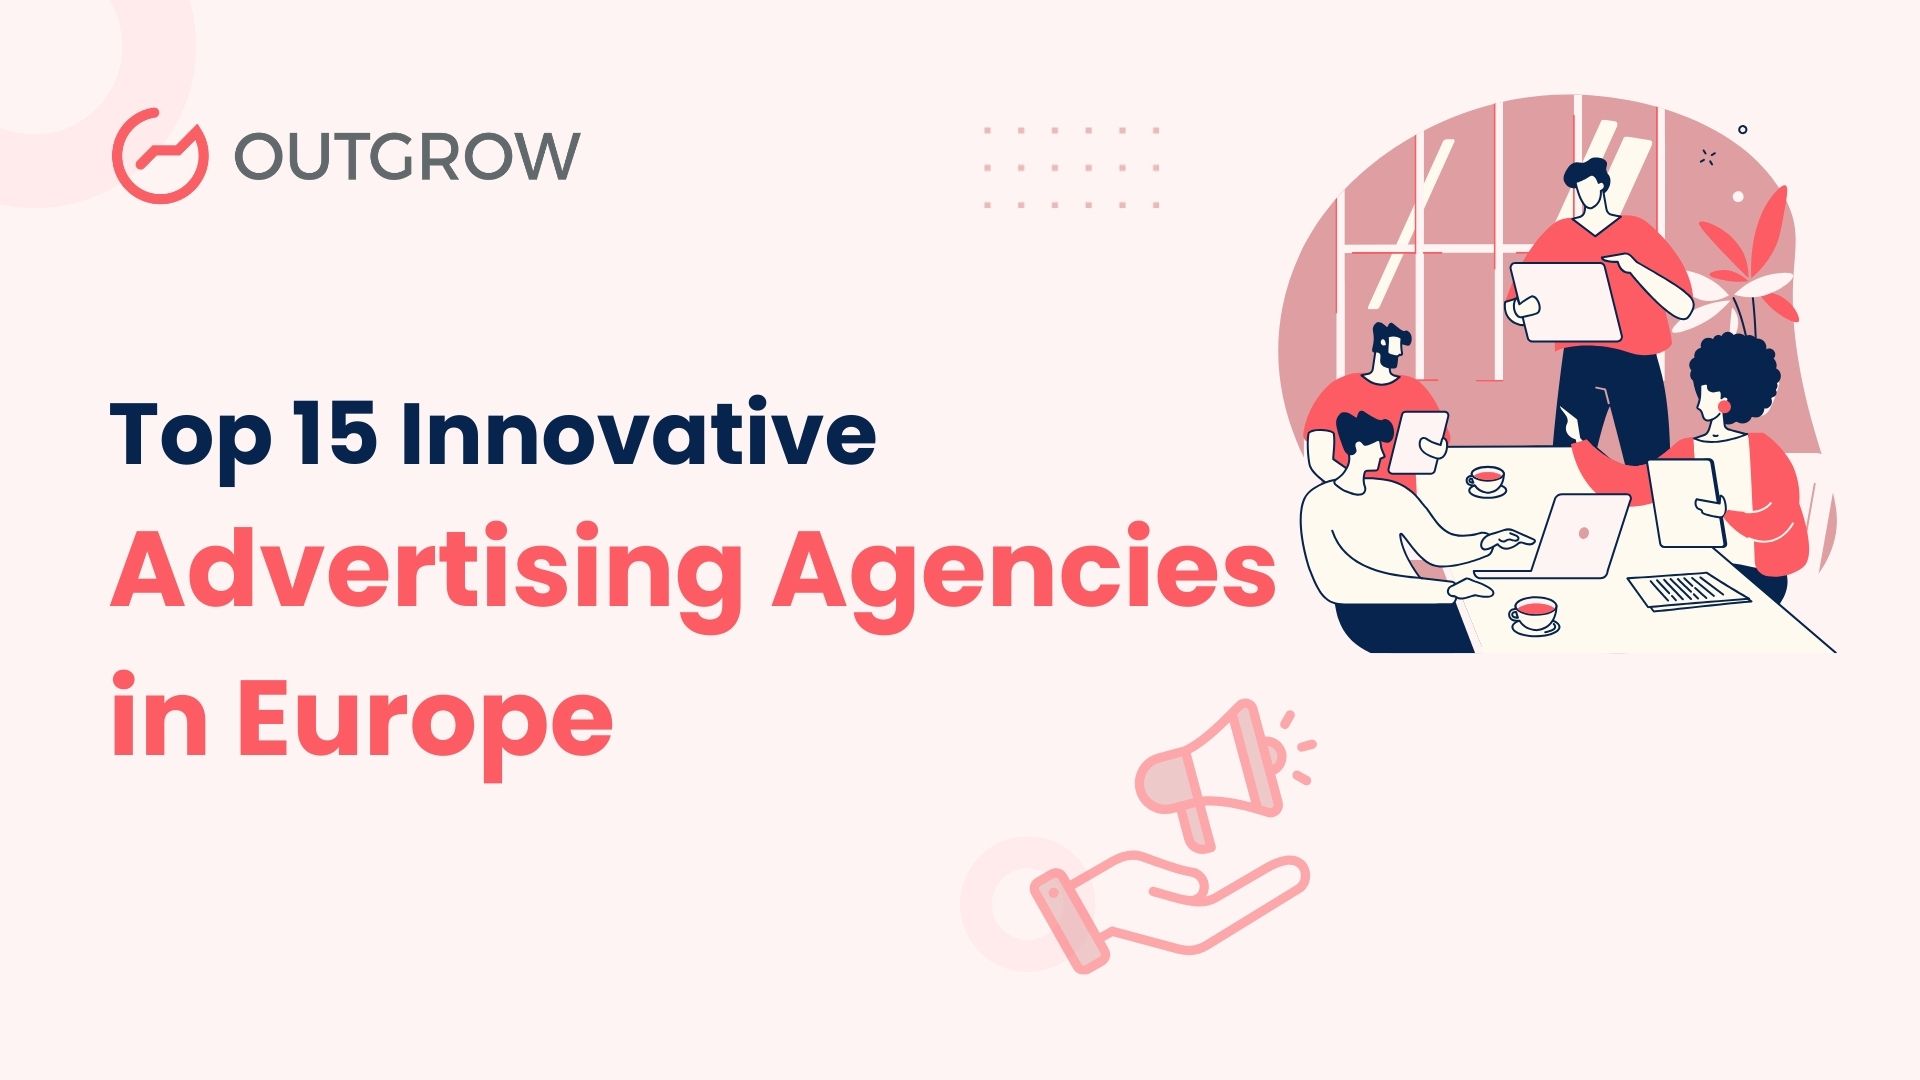 Explore the Top 15 Innovative Advertising Agencies in Europe